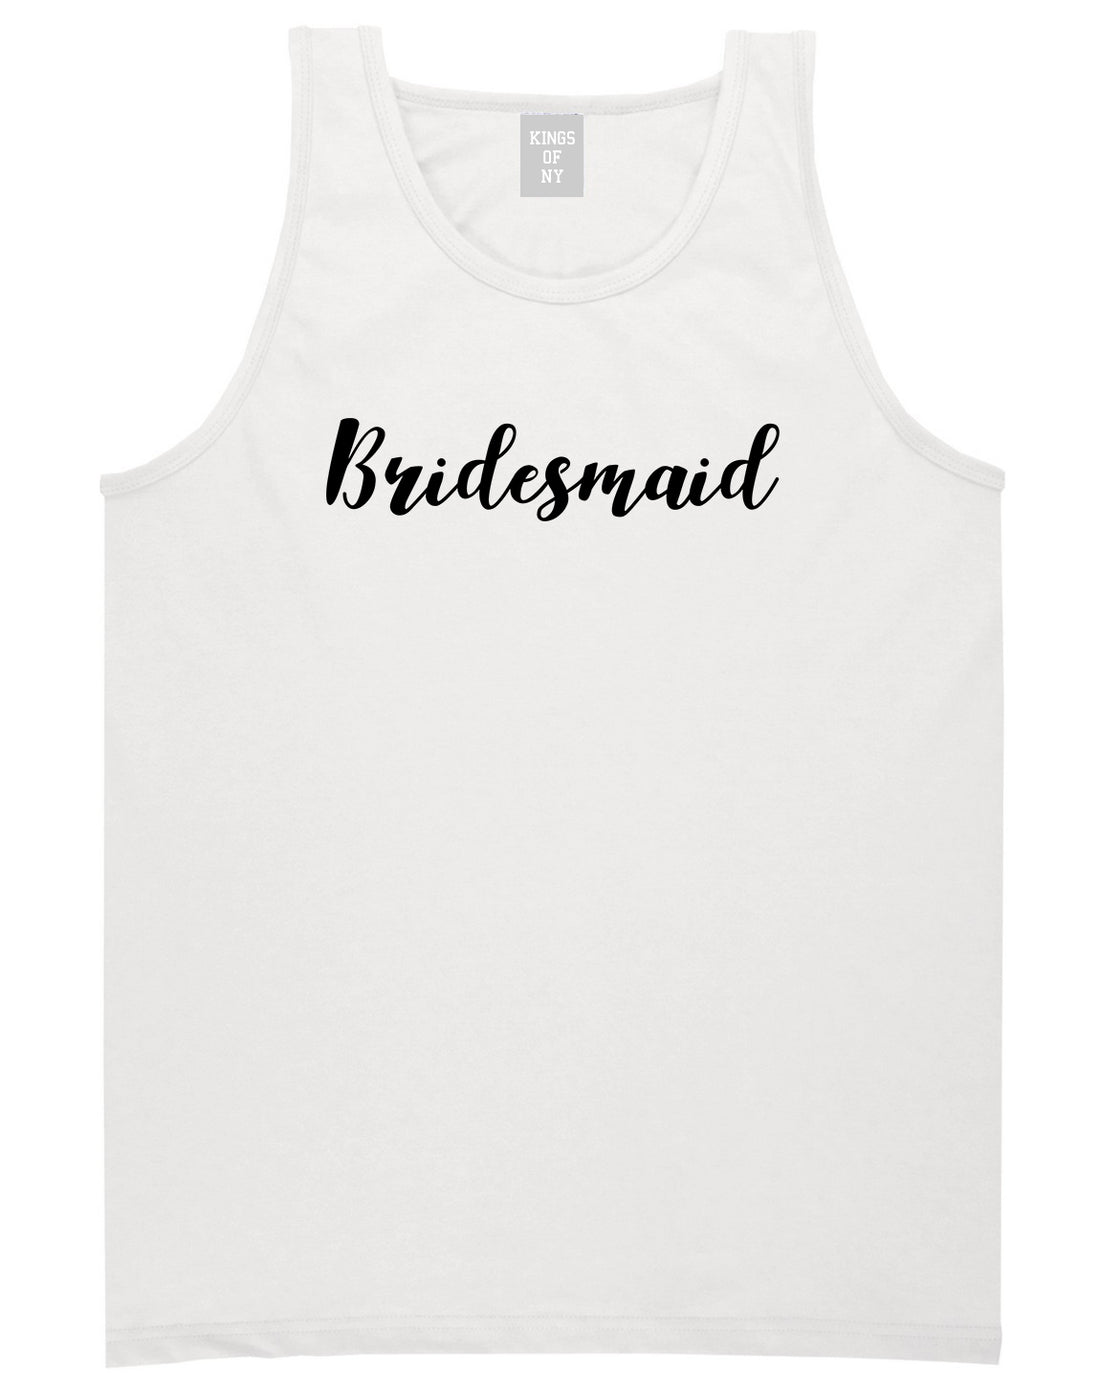 Bridesmaid Bachlorette Party White Tank Top Shirt by Kings Of NY